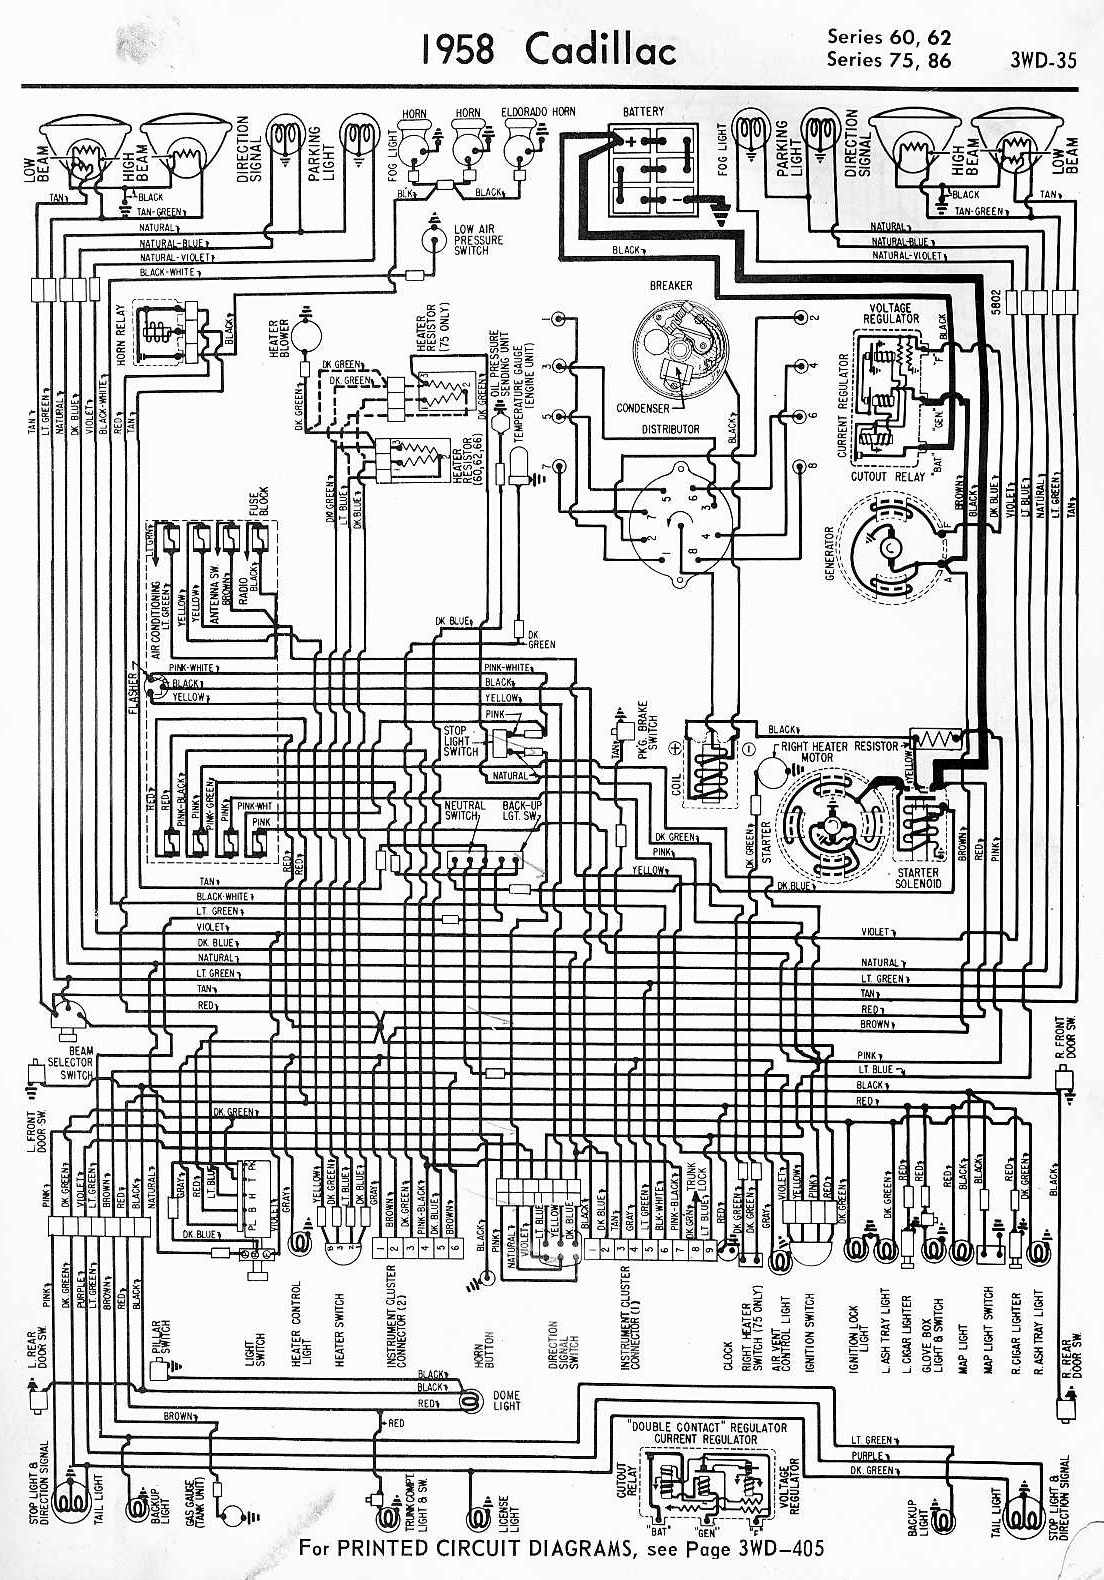 2005 Cadillac Sts Wiring Schematic from www.automotive-manuals.net